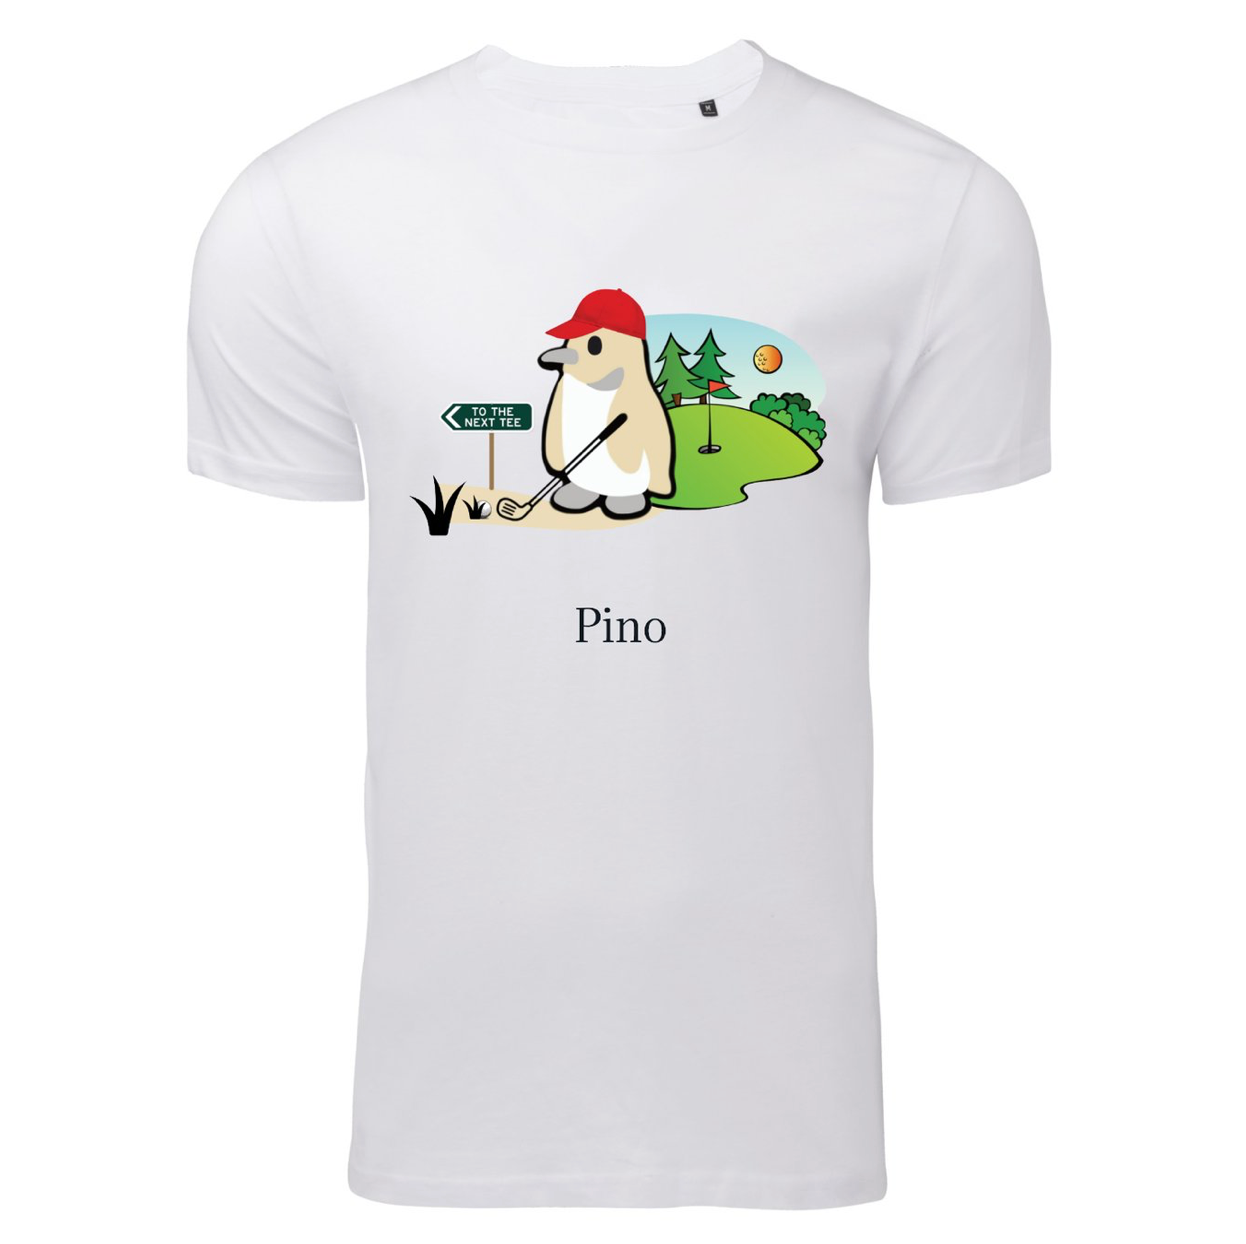 PINO golf t-shirt : "to the next tee" [PRE-ORDER NOW]